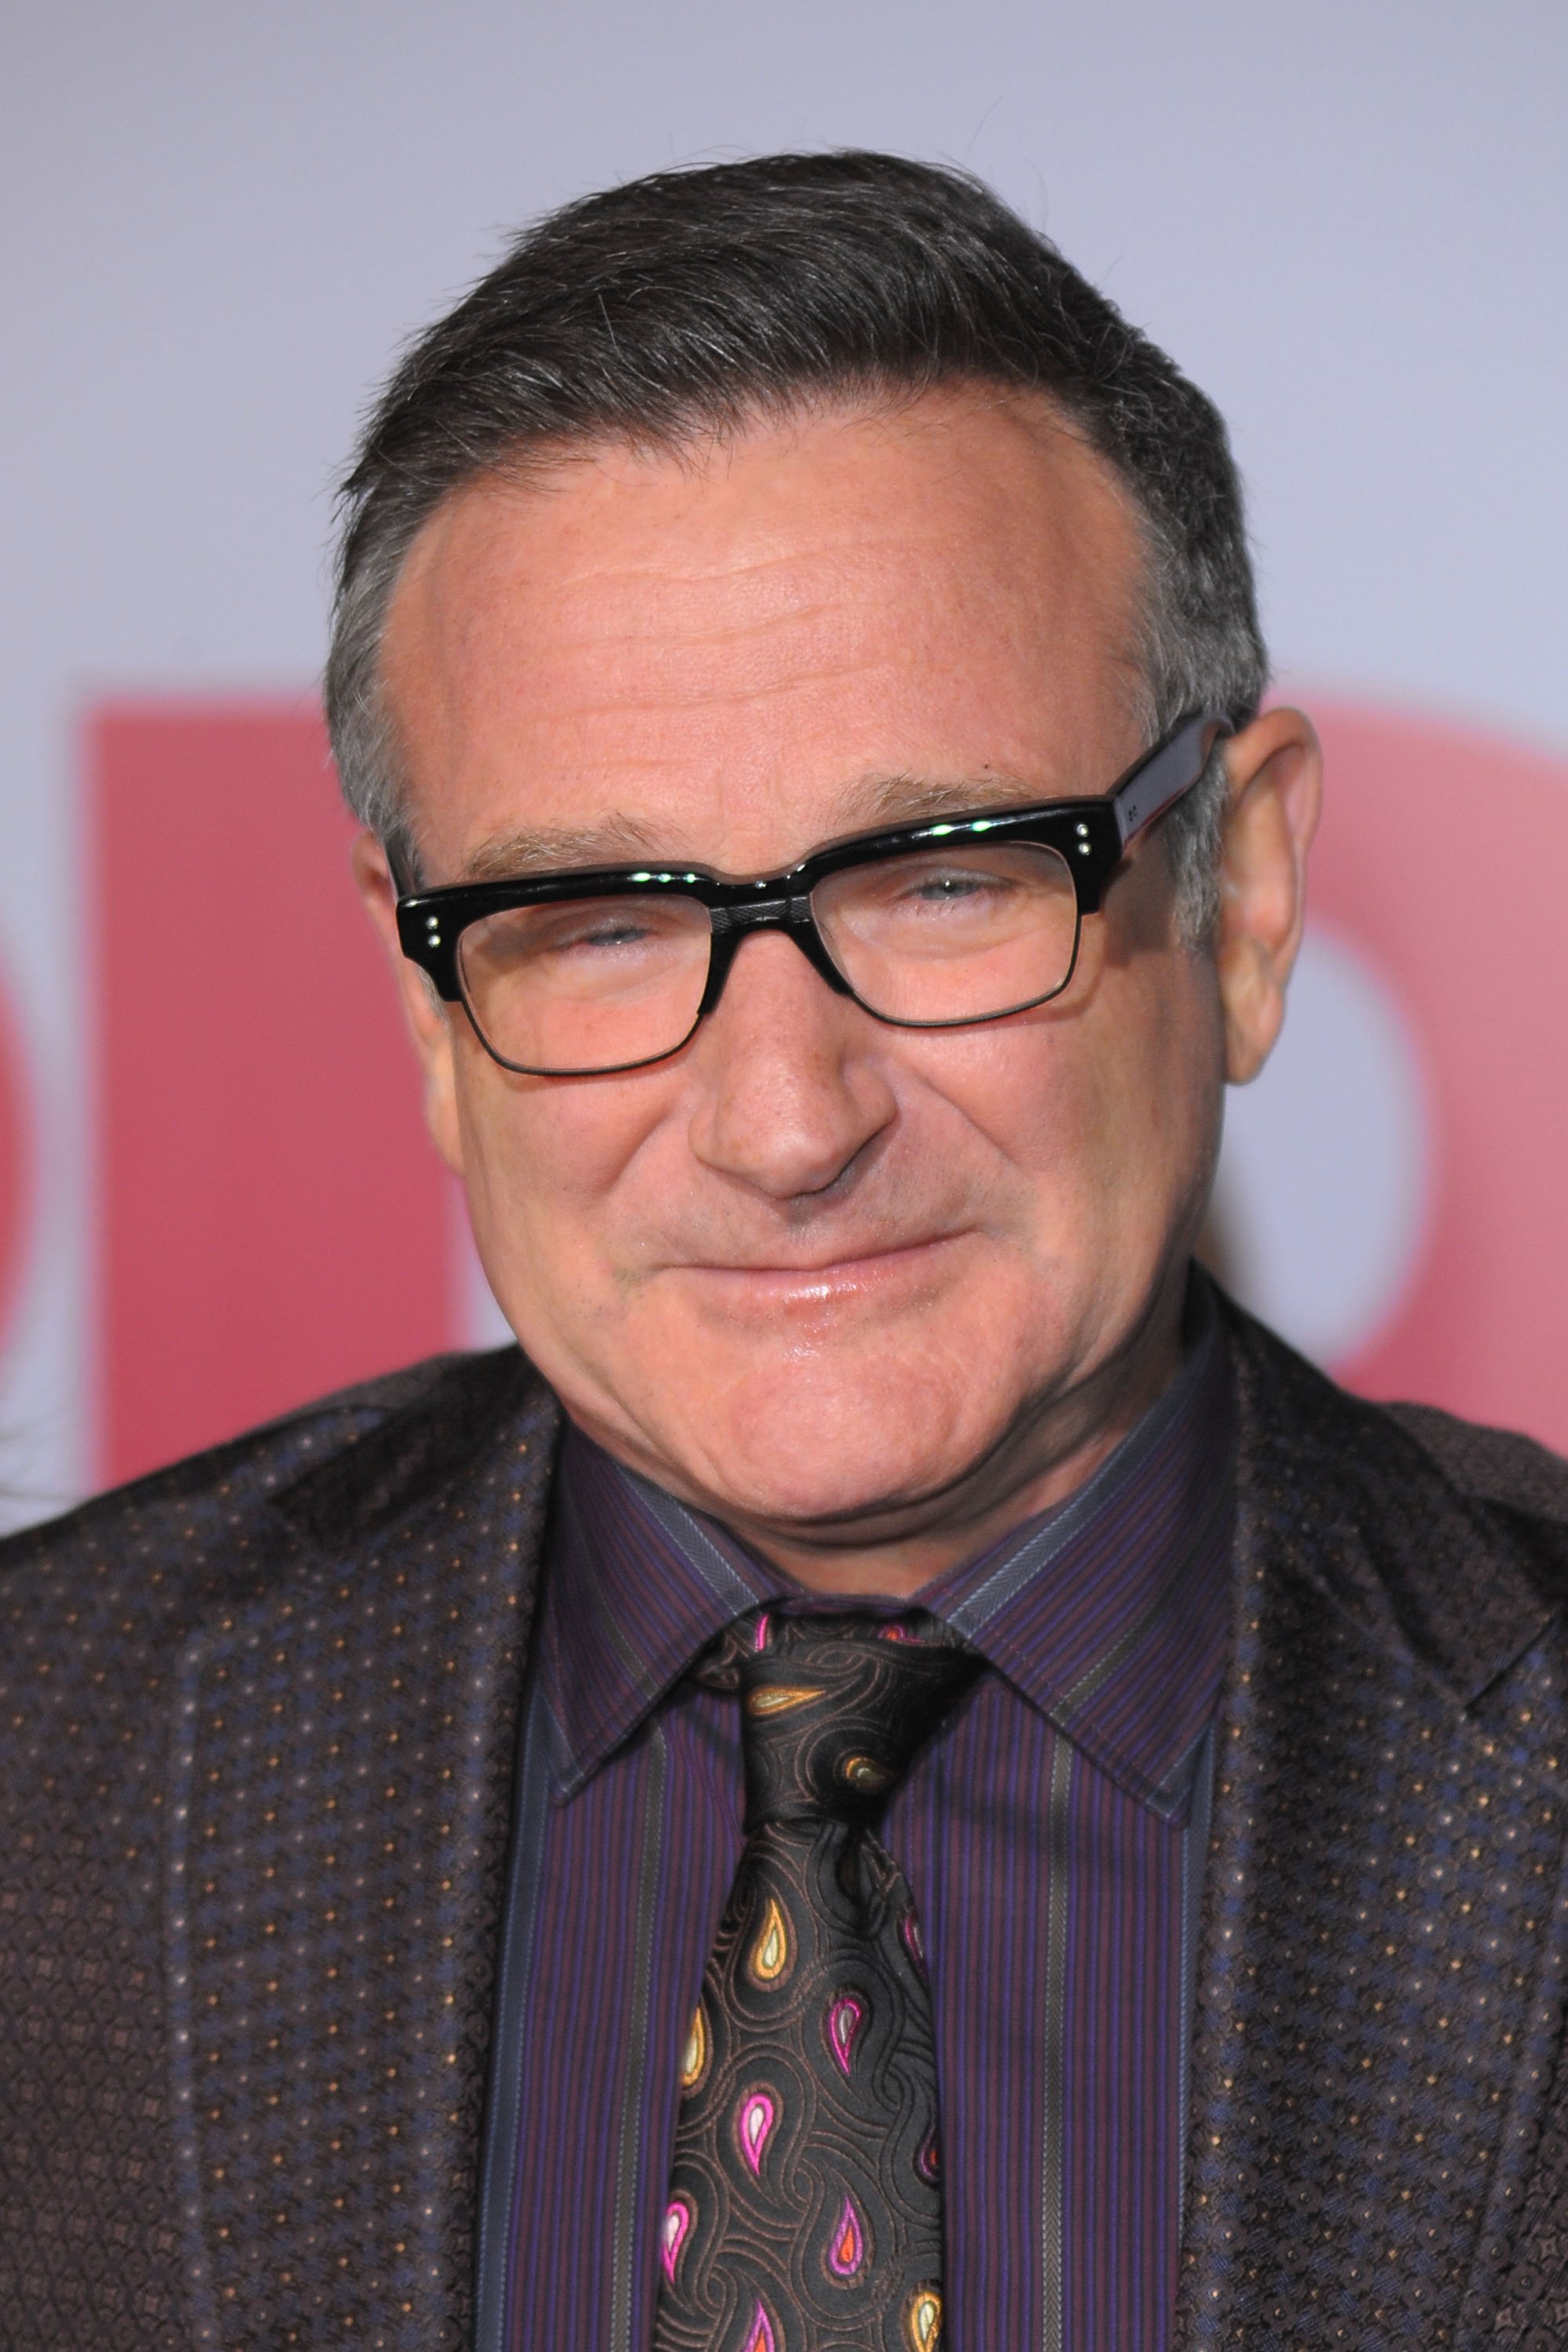 Robin Williams, Premiere "Old Dogs" in Hollywood, 2009 | Quelle: Getty Images